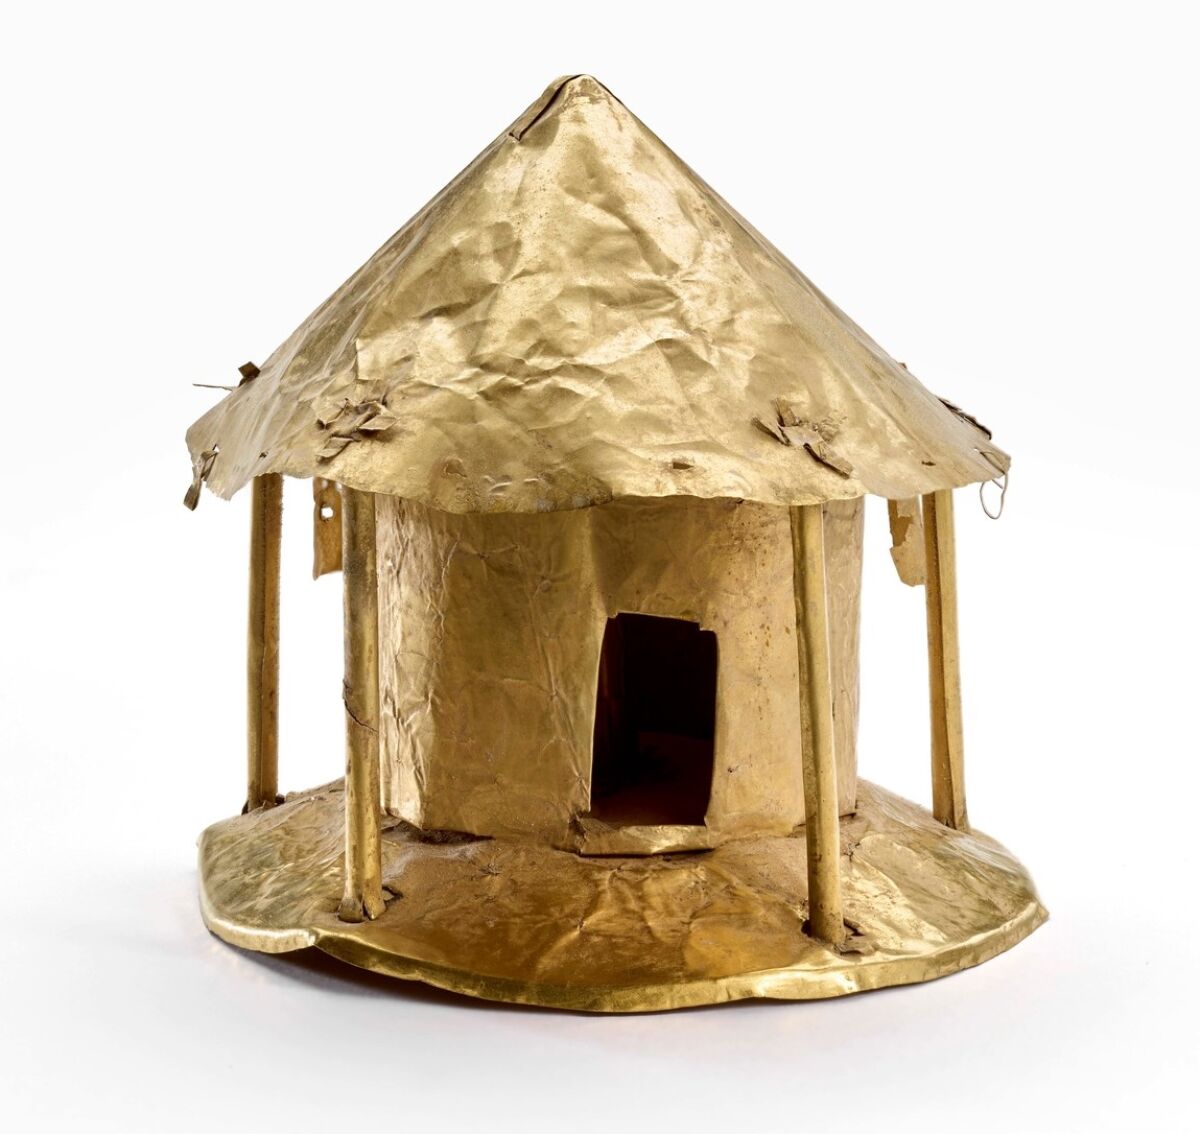 An Indigenous object made with gold alloy shows a circular building with a pitched roof.